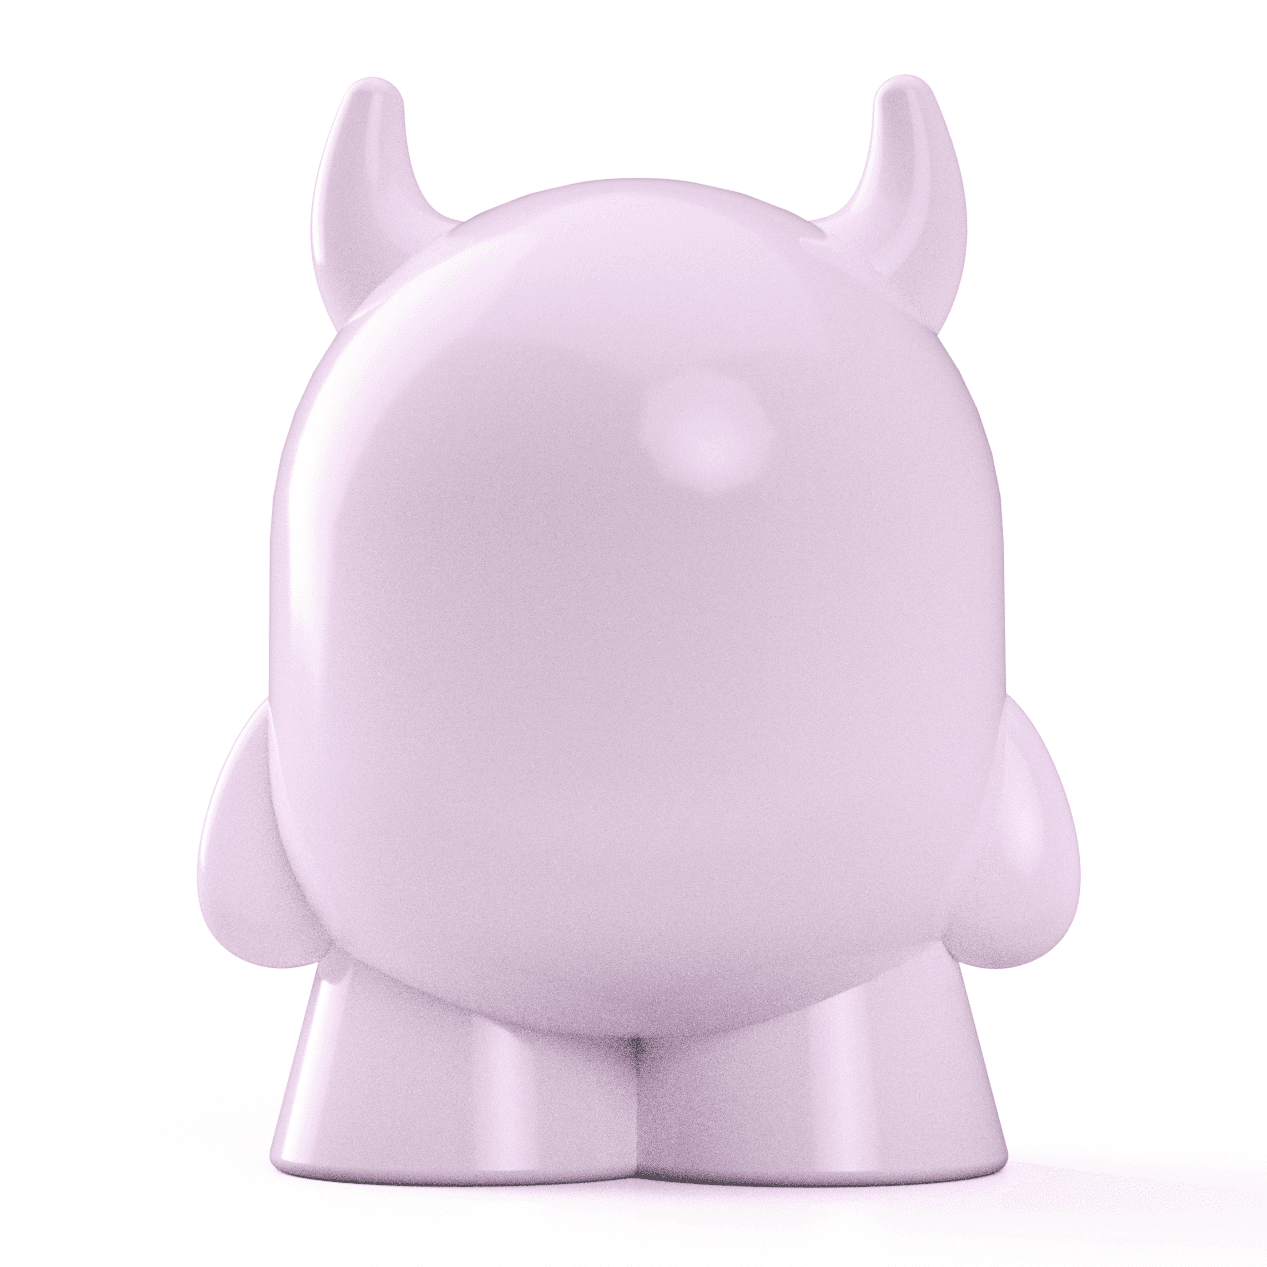 3D Printable Lil Devil Art Toy Figurine STL File for Personal & Commercial Use - Unique Collectible 3d model